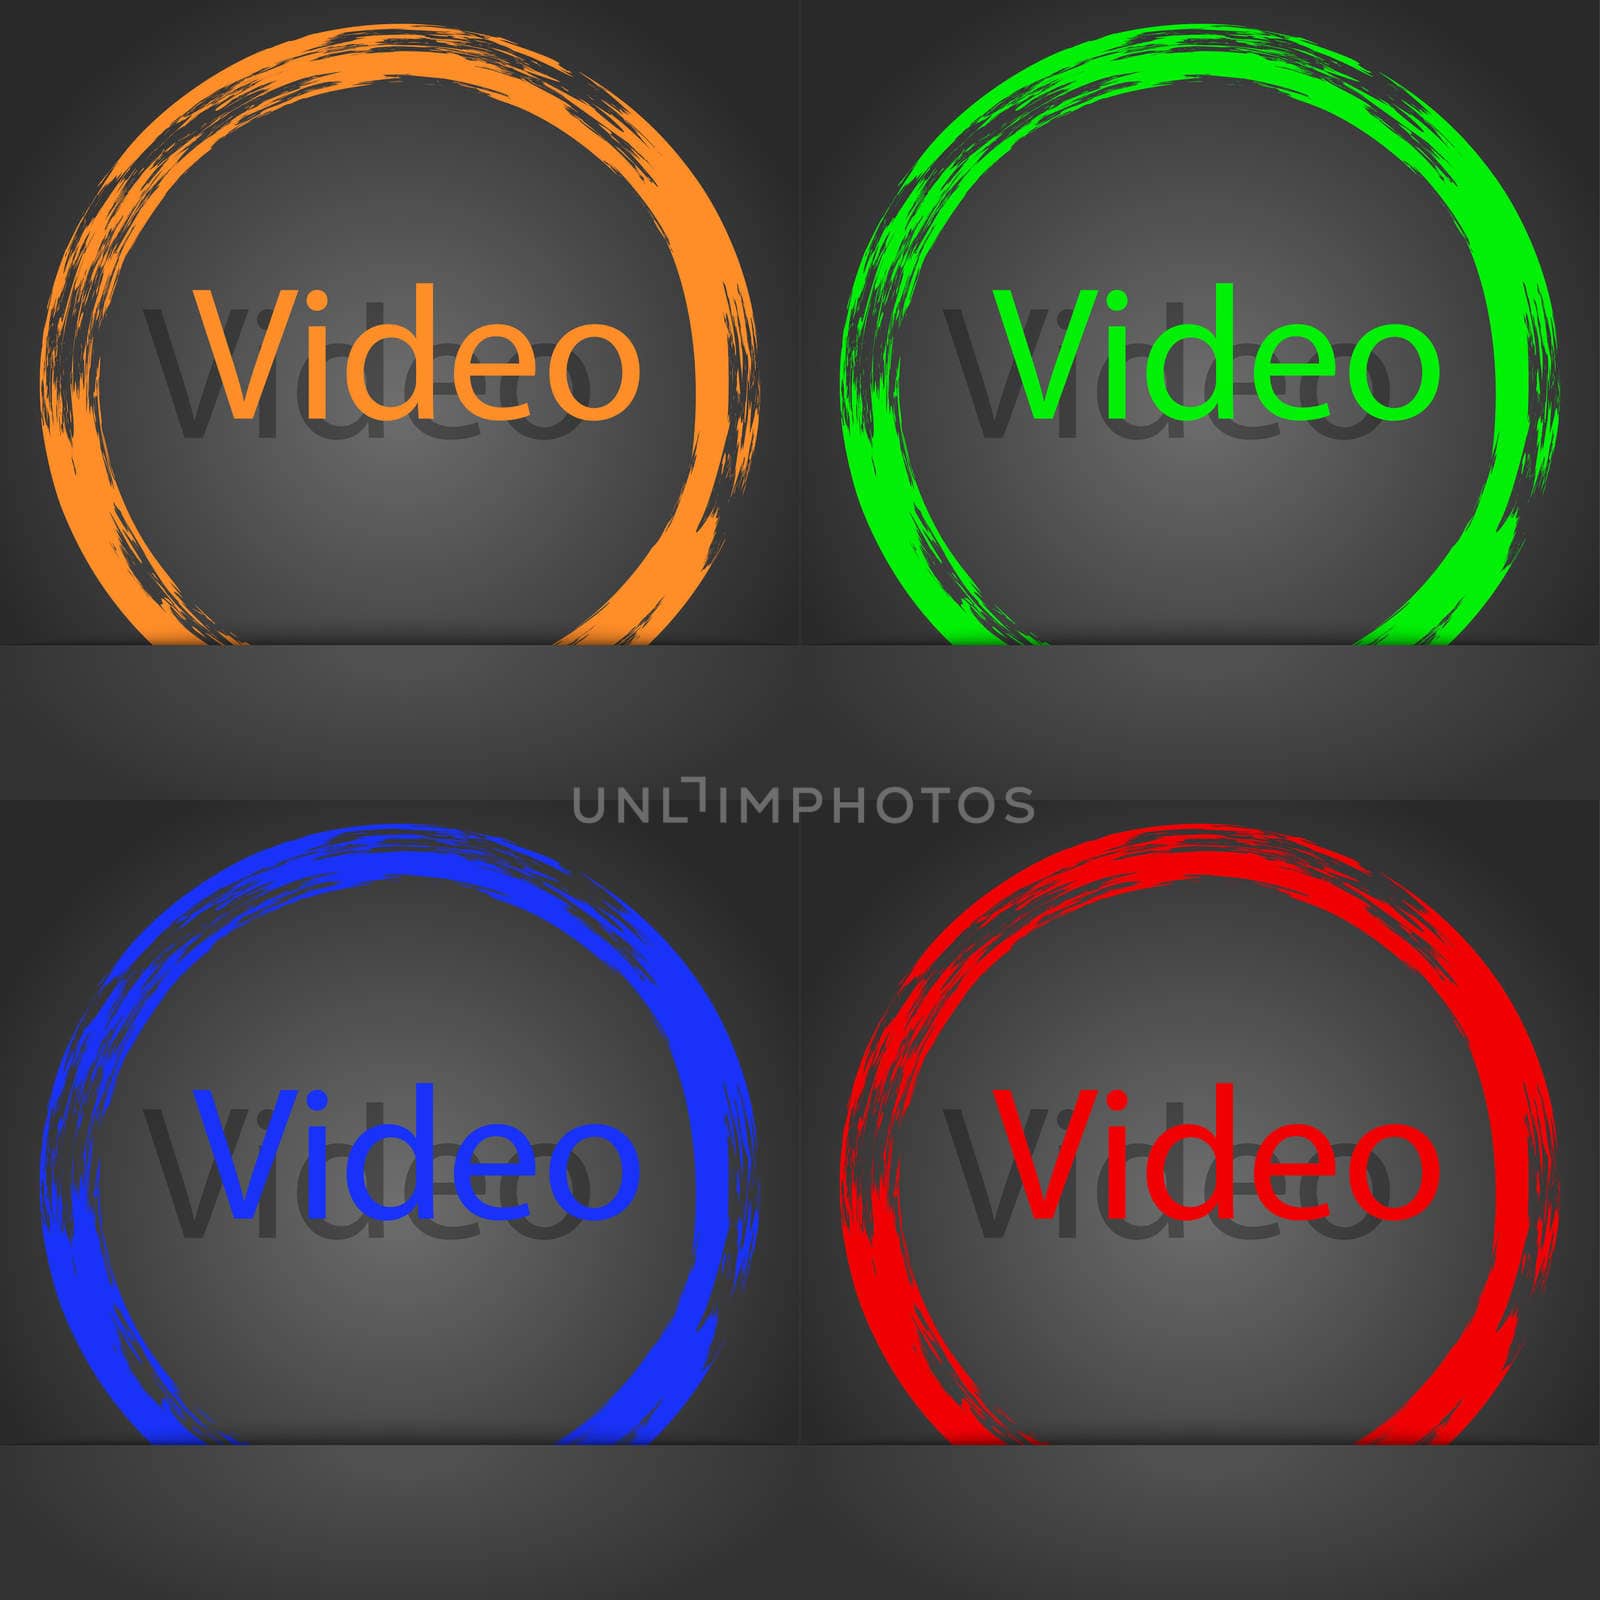 Play video sign icon. Player navigation symbol. Fashionable modern style. In the orange, green, blue, red design. illustration